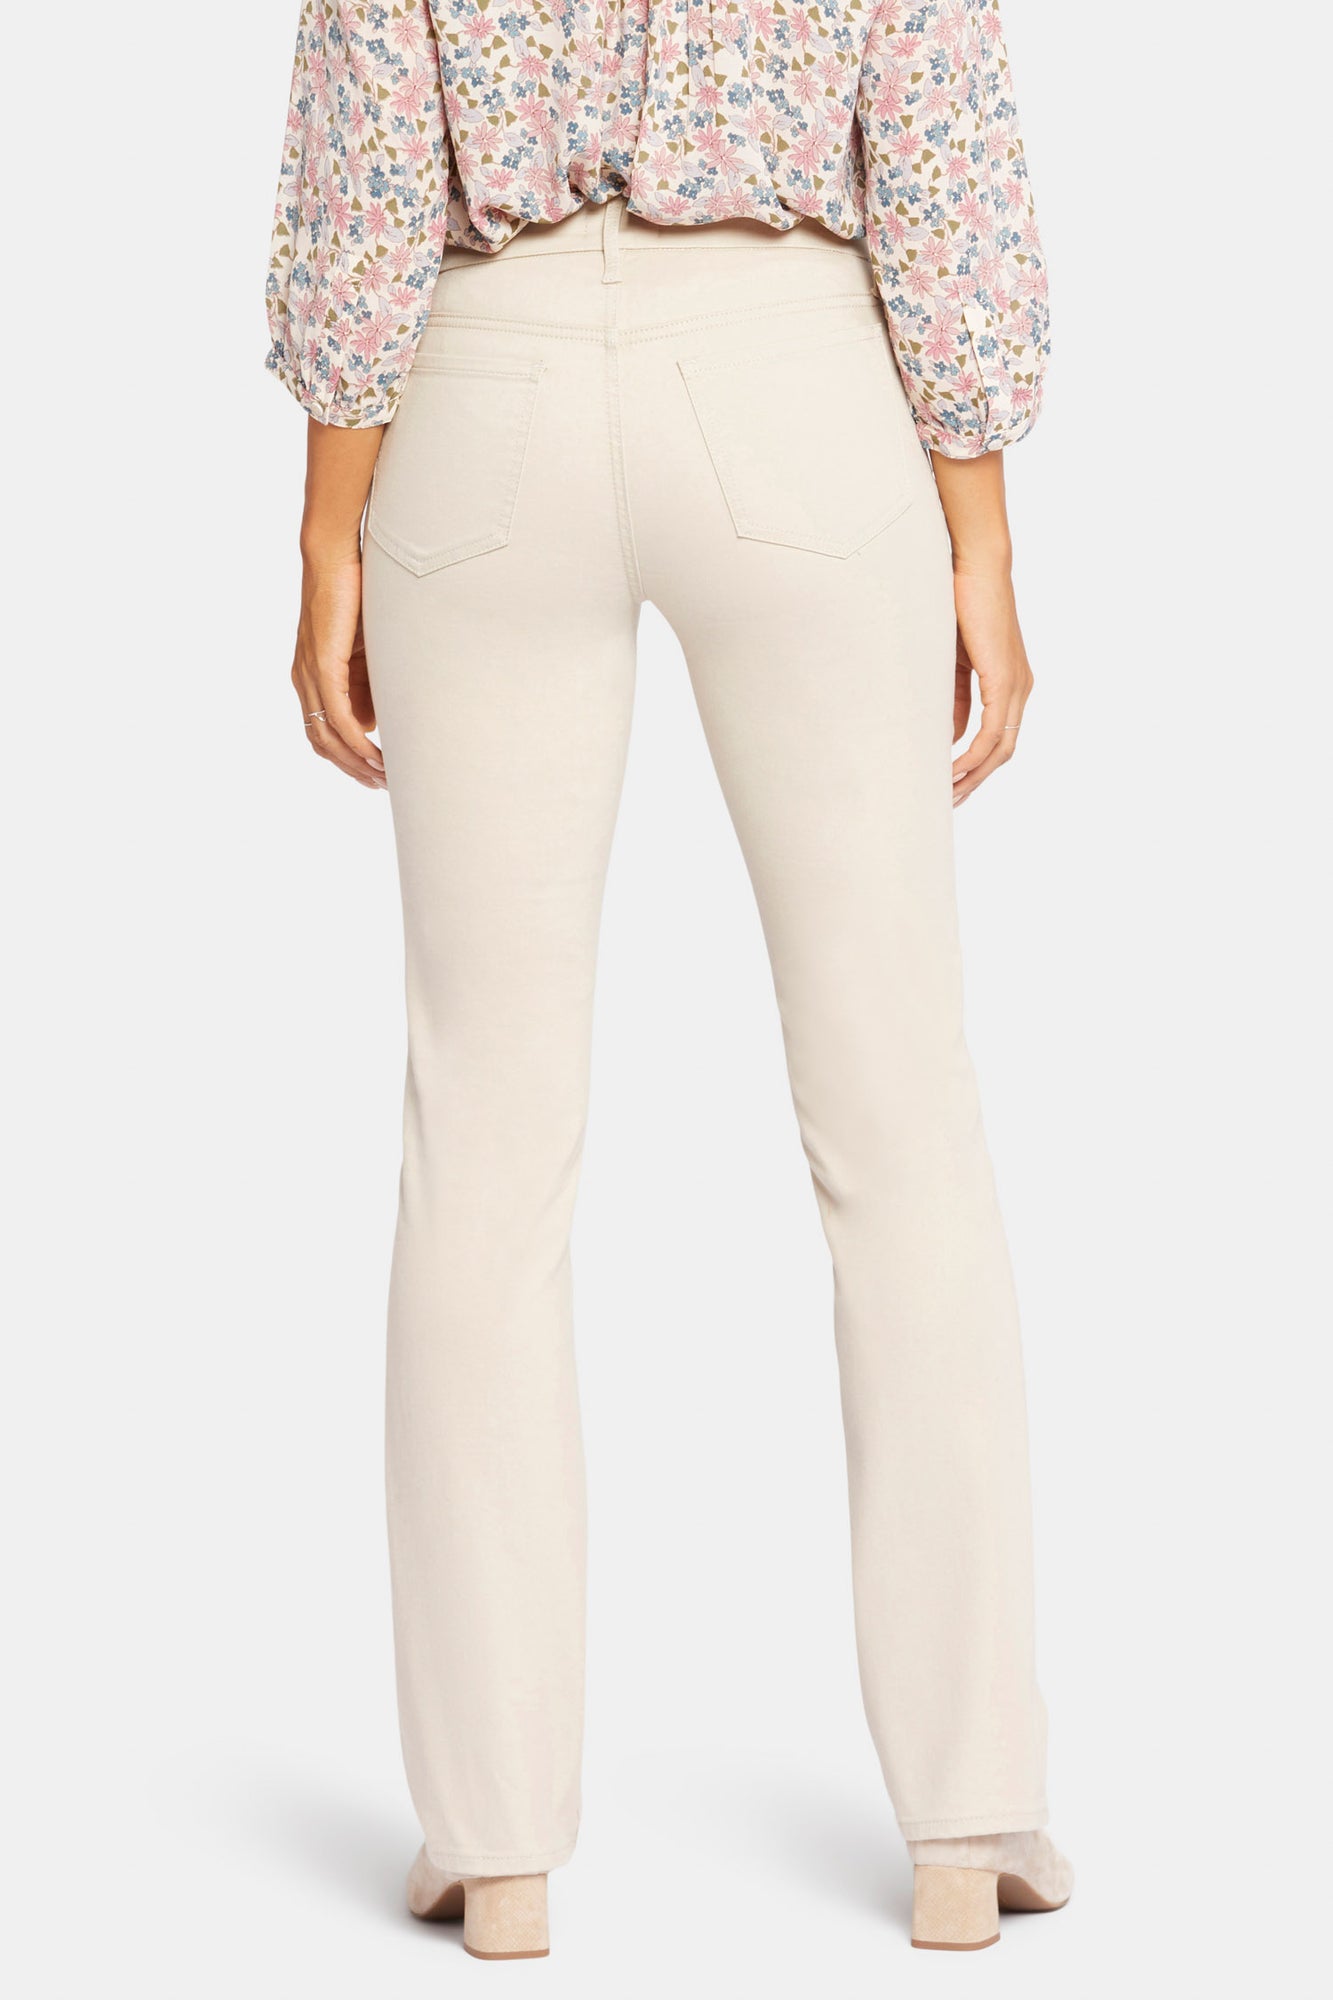 Waist-Match™ Marilyn Straight Jeans In Petite - Feather Tan | NYDJ